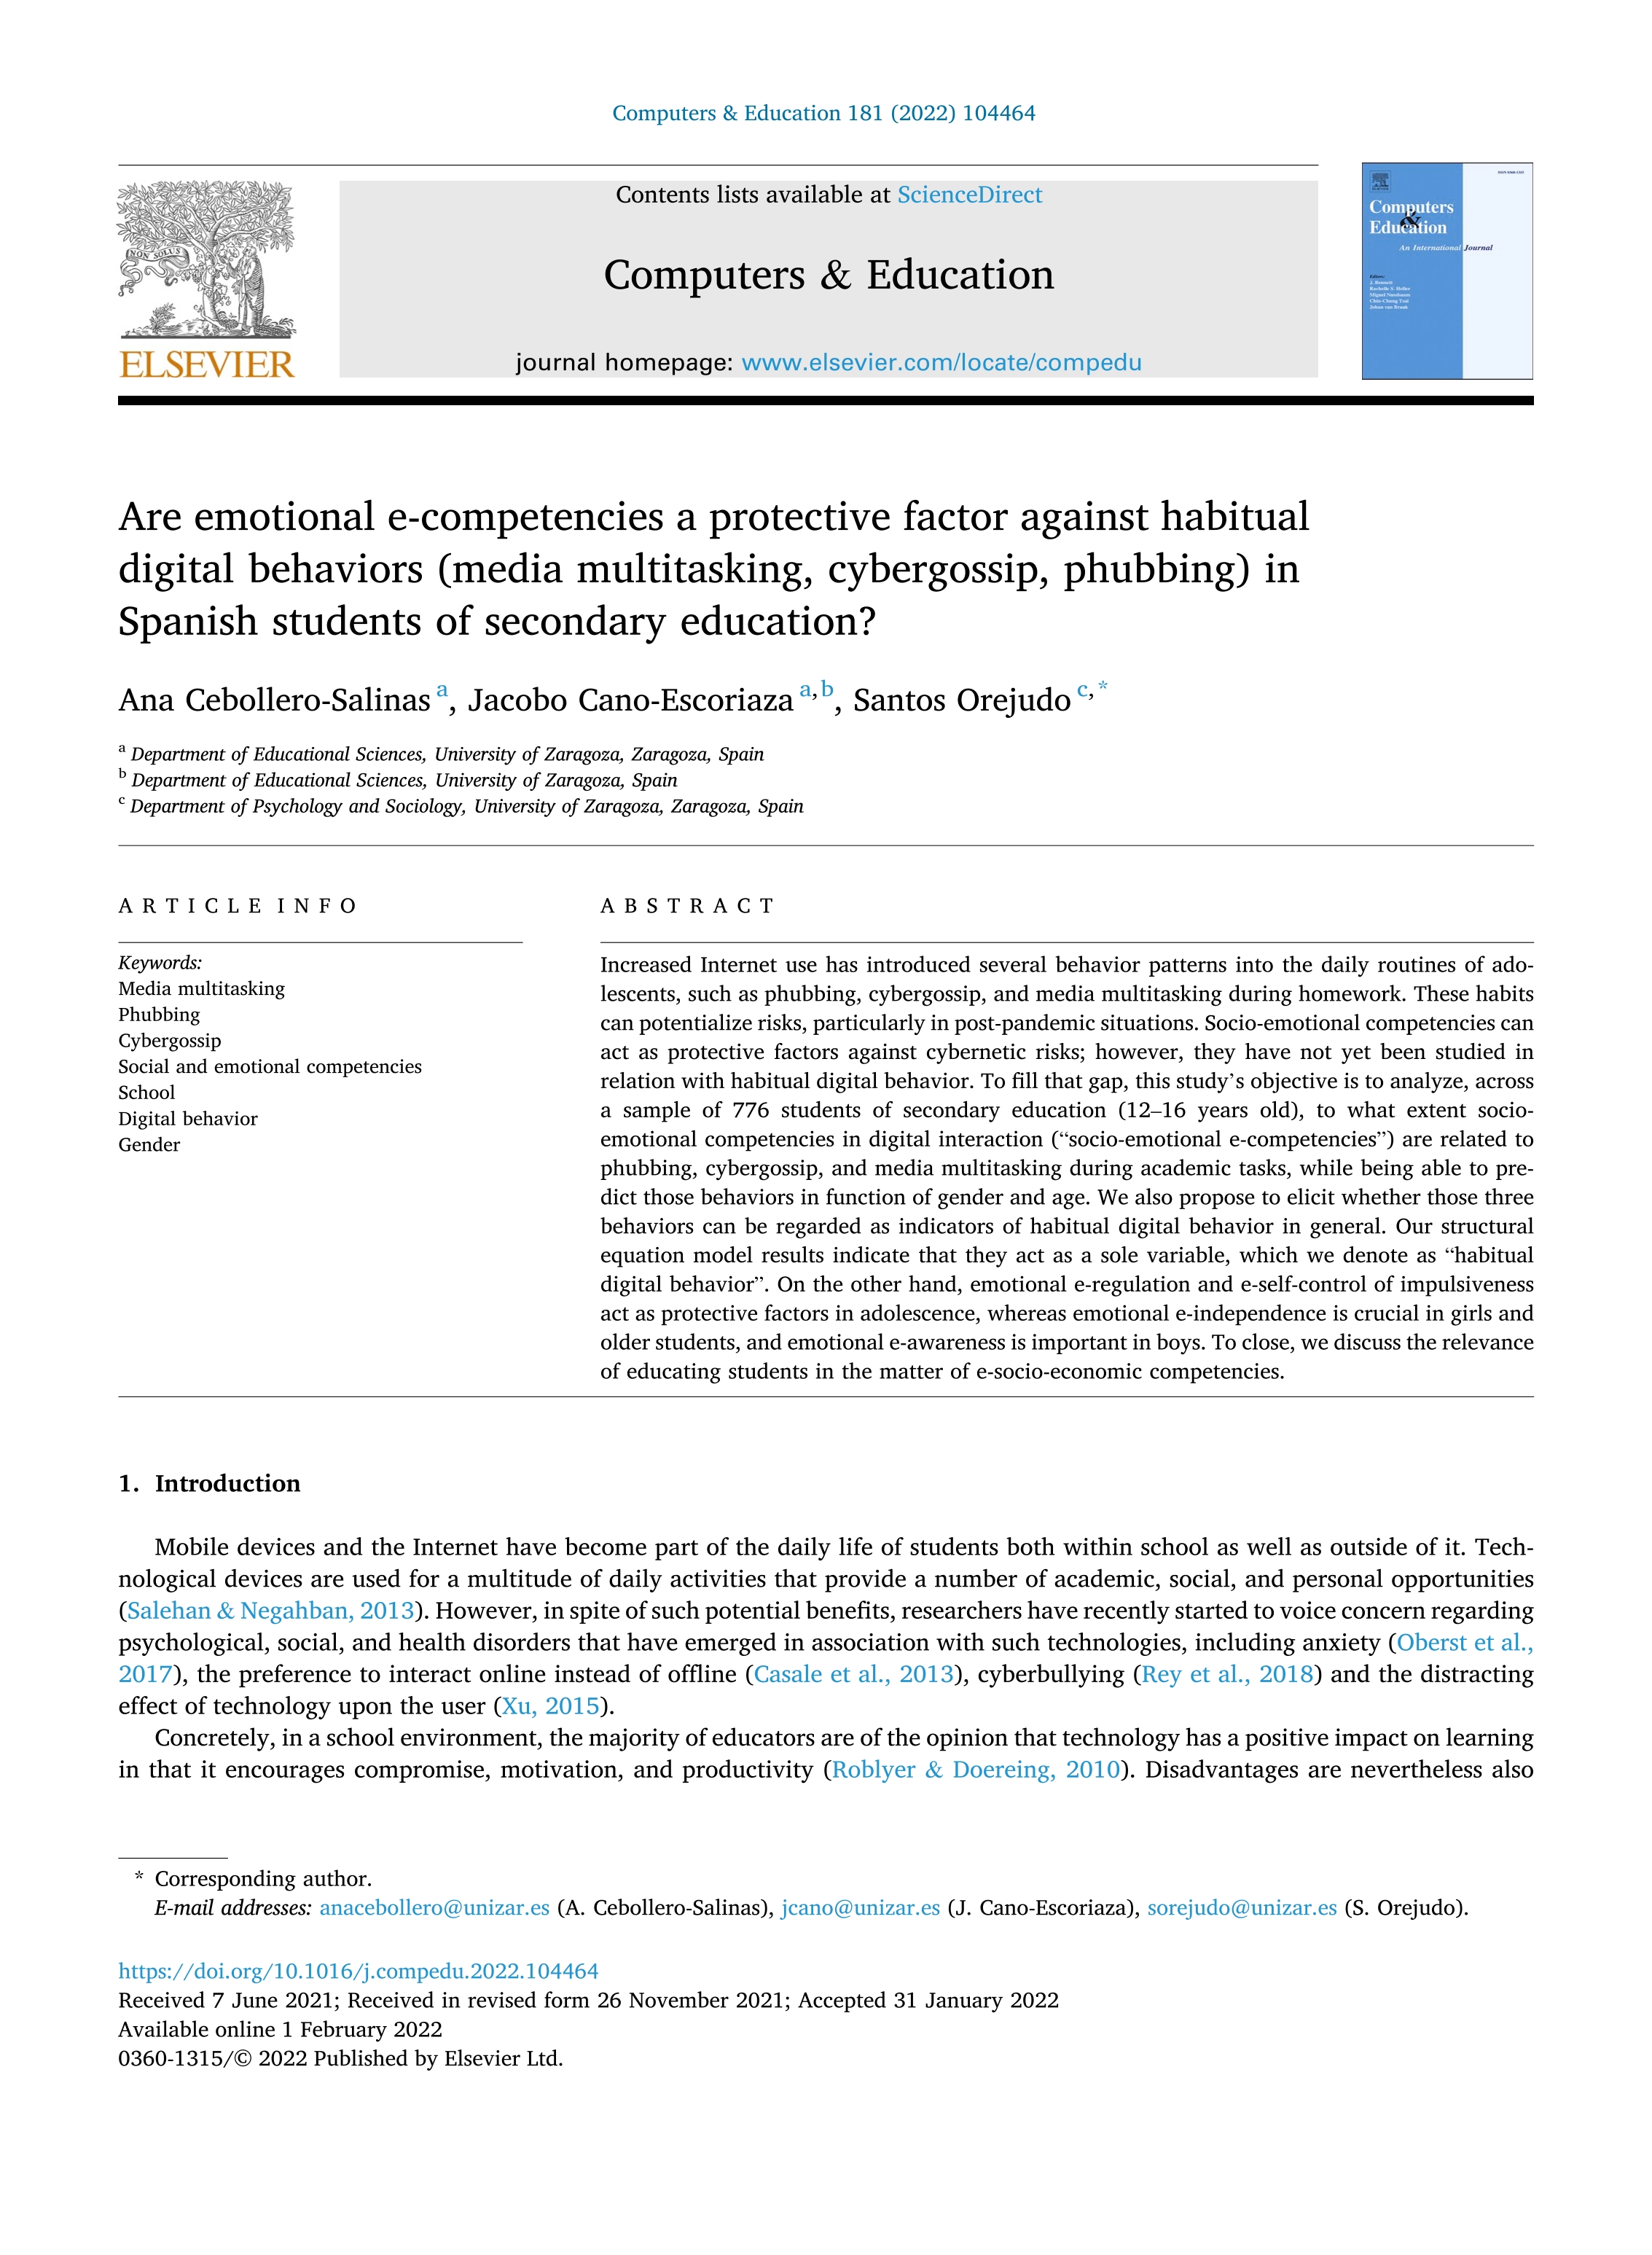 Are emotional e-competencies a protective factor against habitual digital behaviors (media multitasking, cybergossip, phubbing) in Spanish students of secondary education?